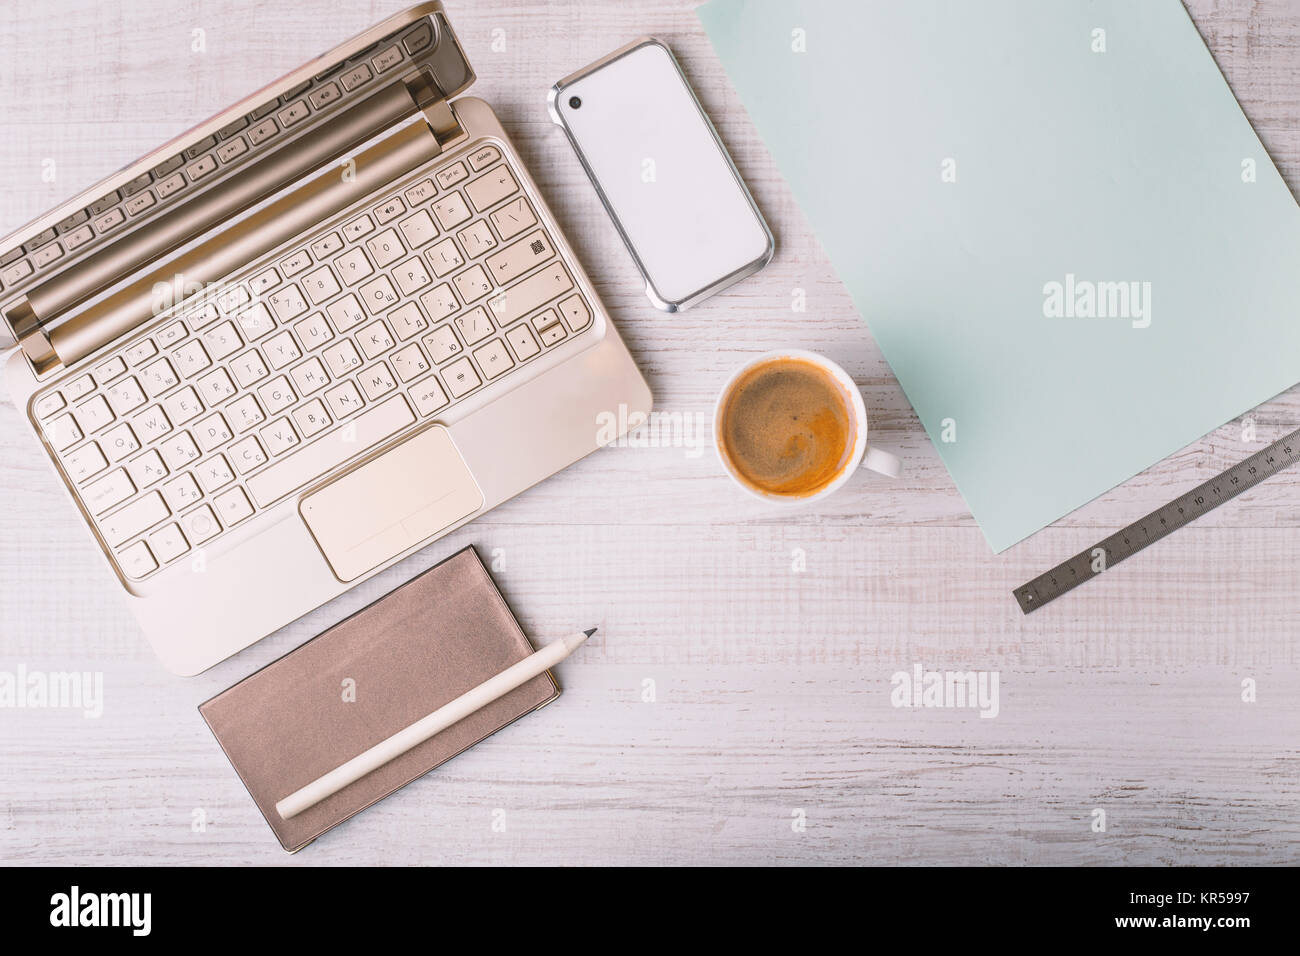 Laptop, phone and address book and a cup on a wooden table Stock Photo